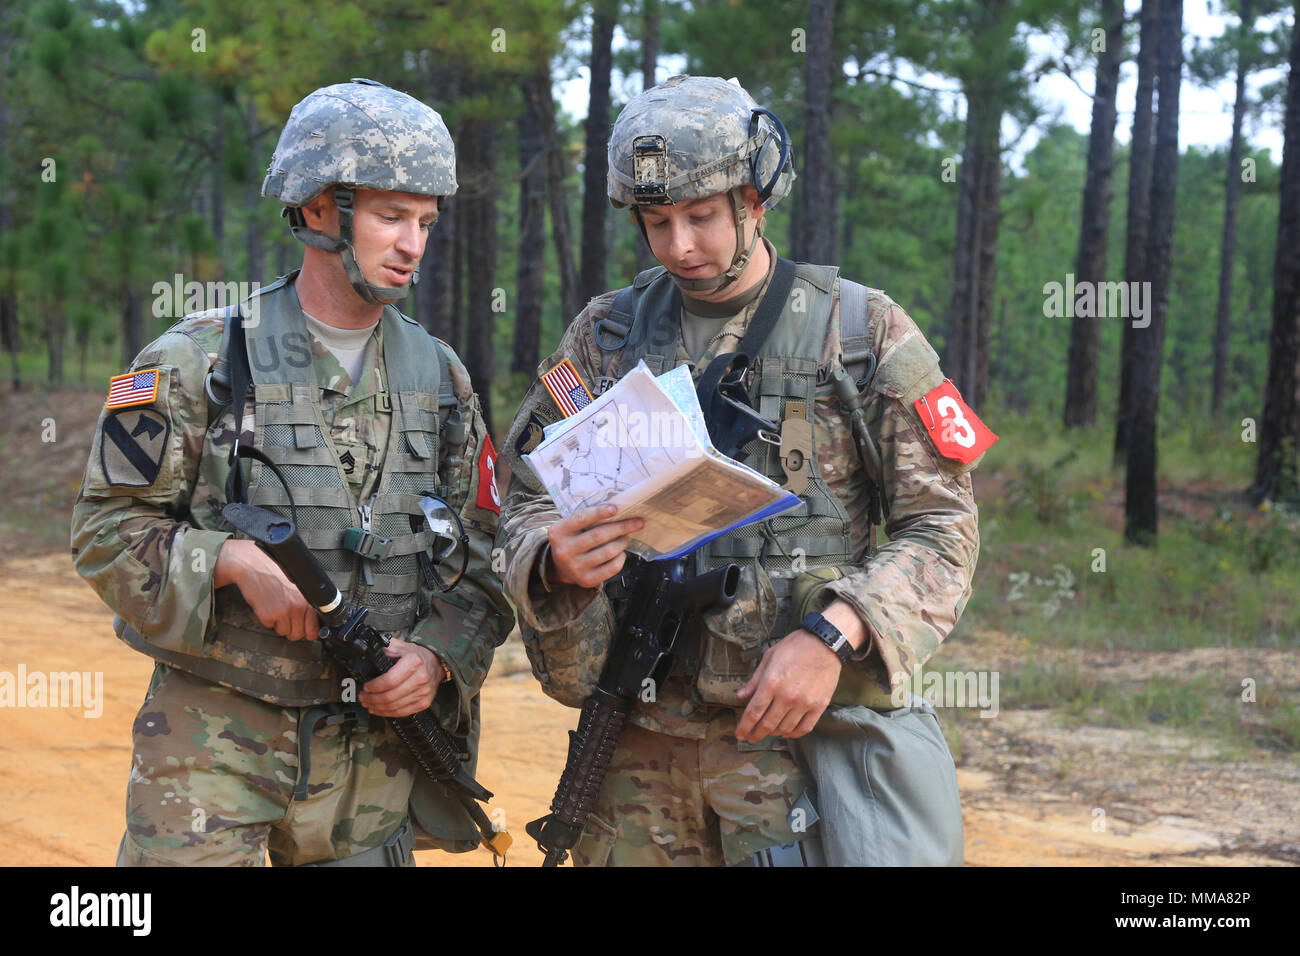 U.S. Army Sgt. 1st Class Zachary Dispennette and Sgt. Christopher Faulkner, both assigned to the McDonald Army Health Center, discuss a plan during the 2017 Best Medic Competition at Fort Bragg, N.C., Sep. 18-21, 2017. The competition tested the physical and mental toughness, as well as the technical competence, of each medic to identify the team moving forward to represent the region at the next level of the competition.  (U.S. Army photo by Spc. Paris Maxey) Stock Photo